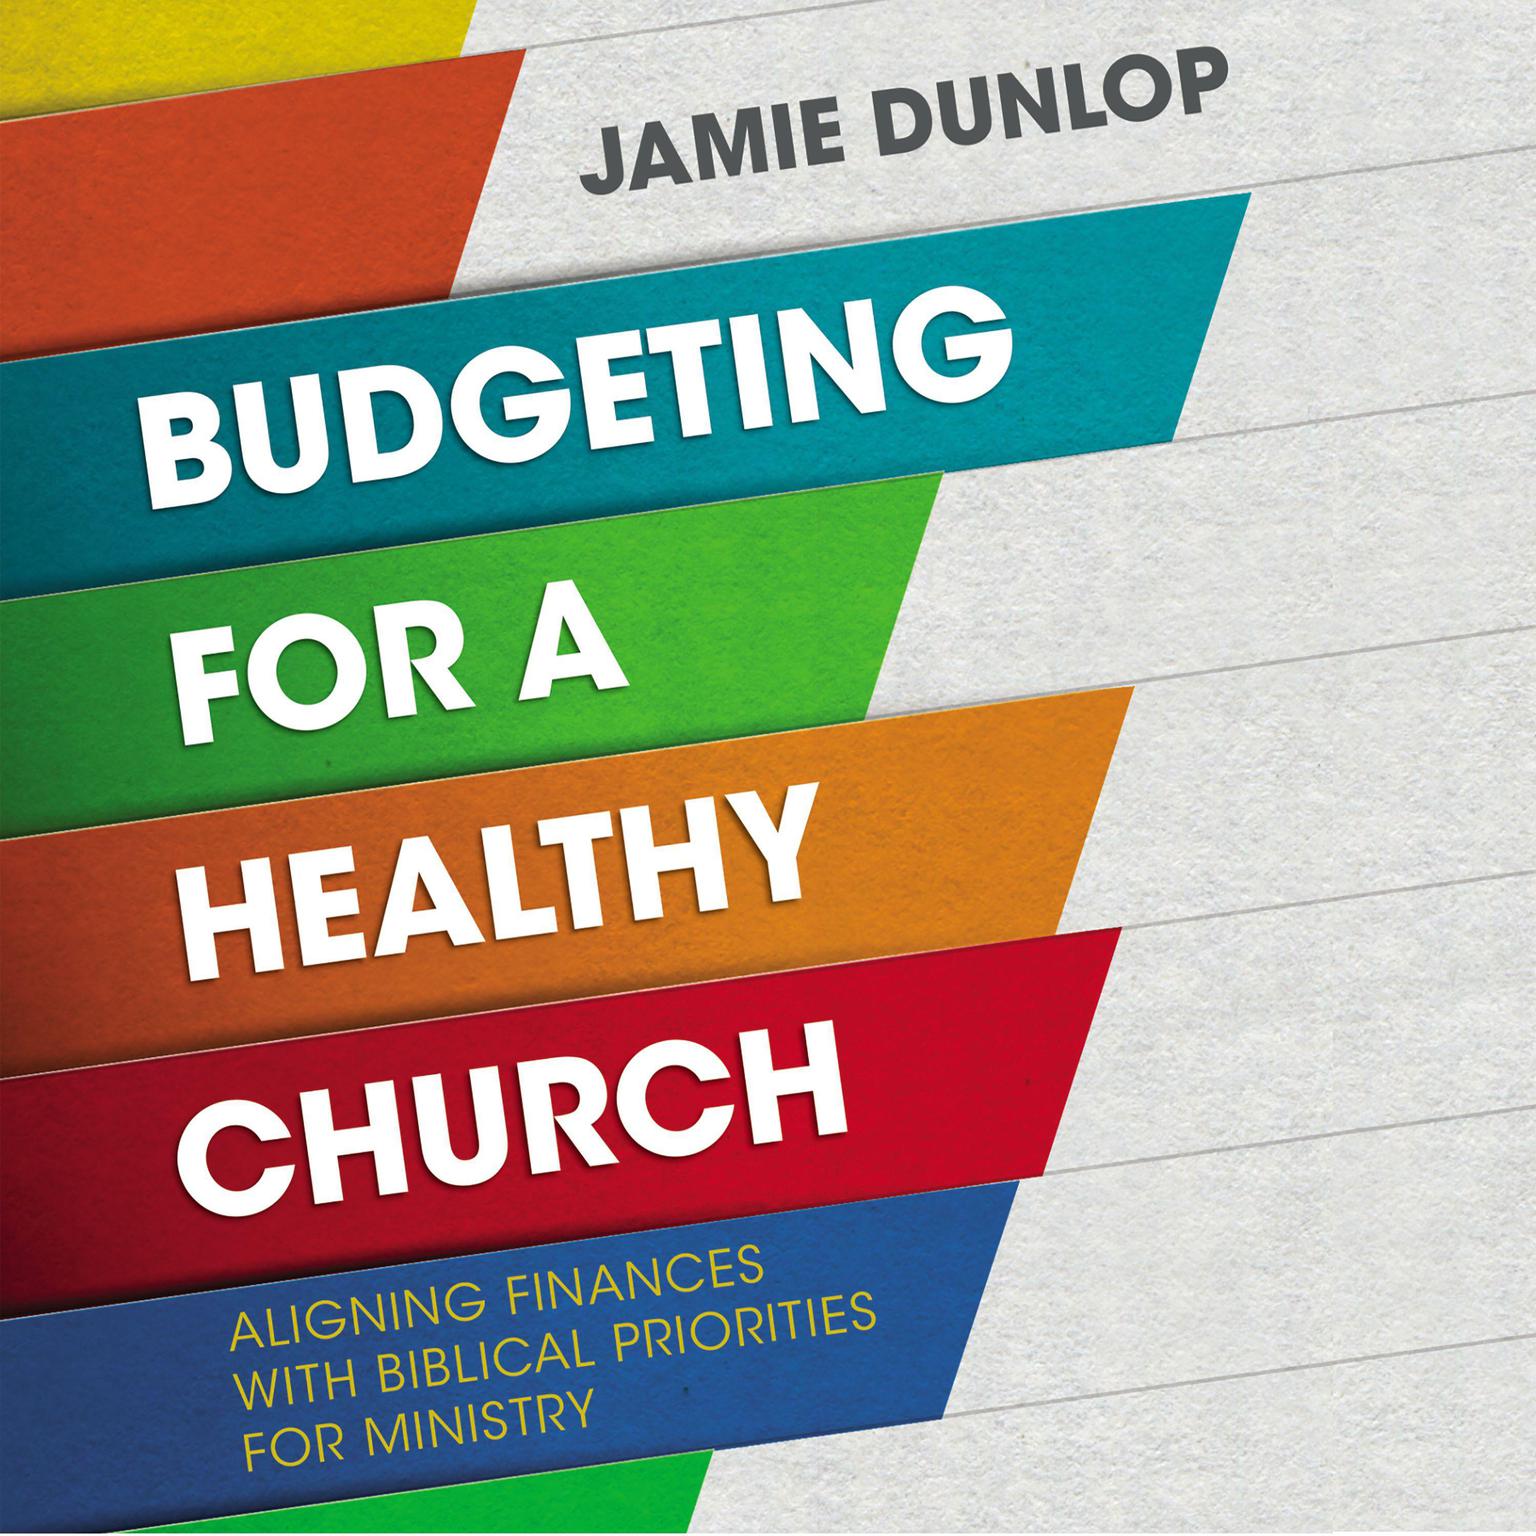 Budgeting for a Healthy Church: Aligning Finances with Biblical Priorities for Ministry Audiobook, by Jamie Dunlop